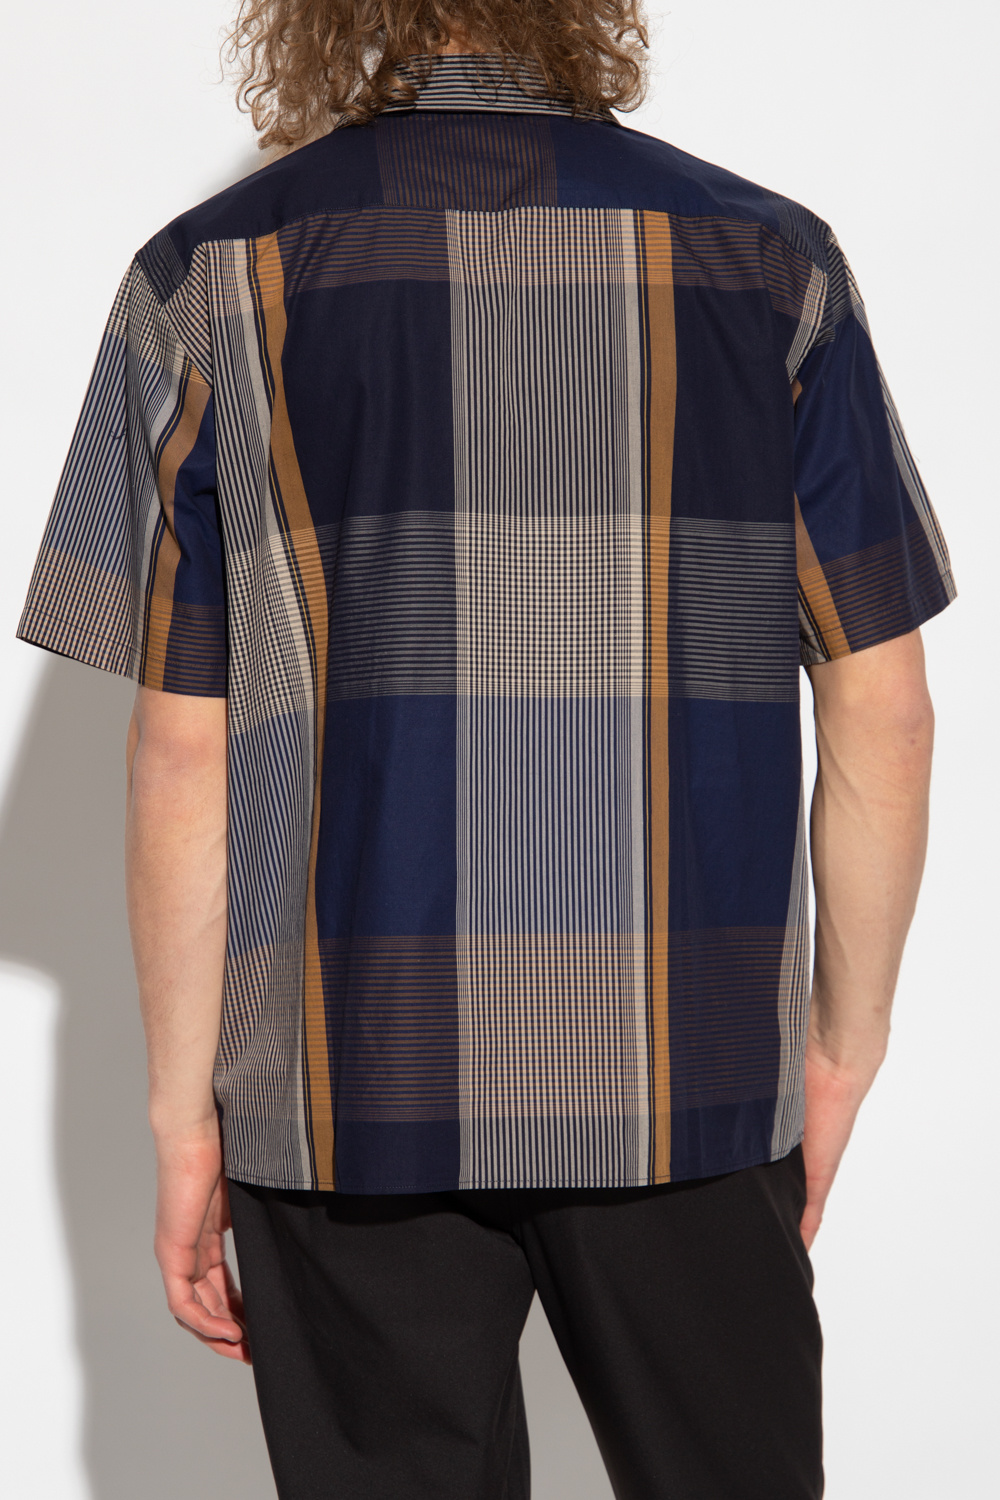 Norse Projects ‘Carsten’ shirt